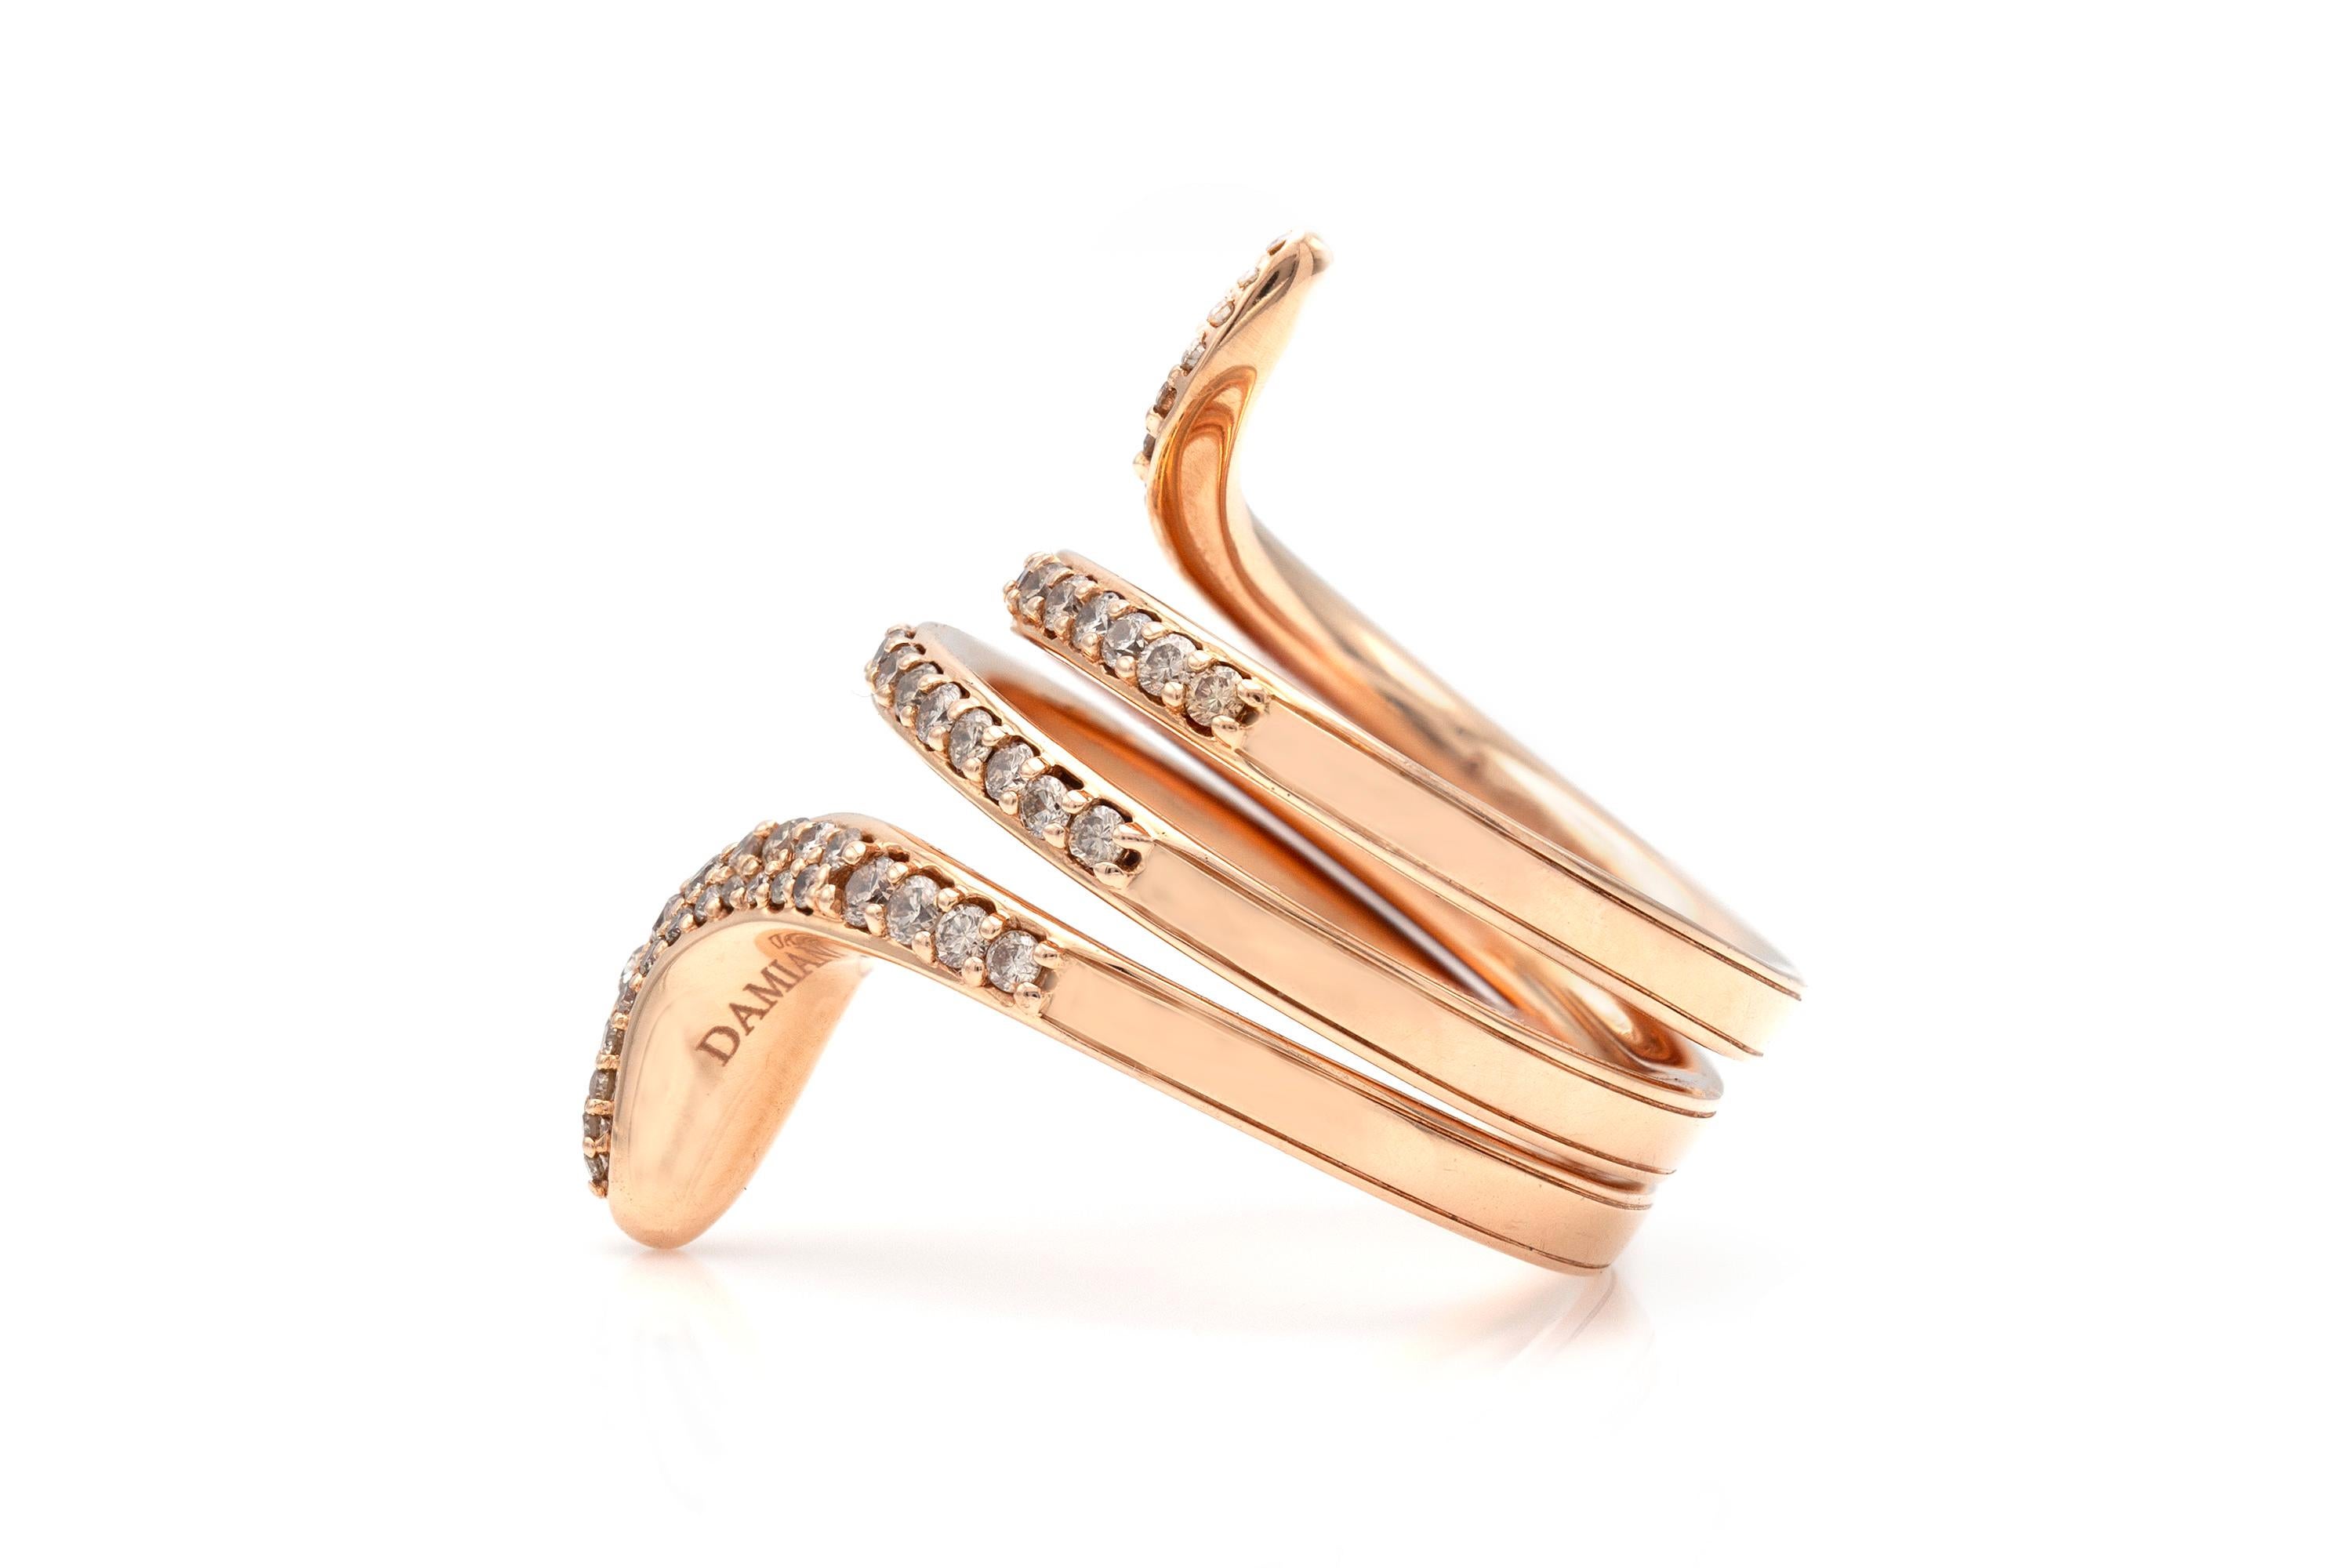 From Damiani's Eden Collection, the snake-shaped ring features 0.96 carat of diamonds in 18K rose gold. 
Signed Damiani.